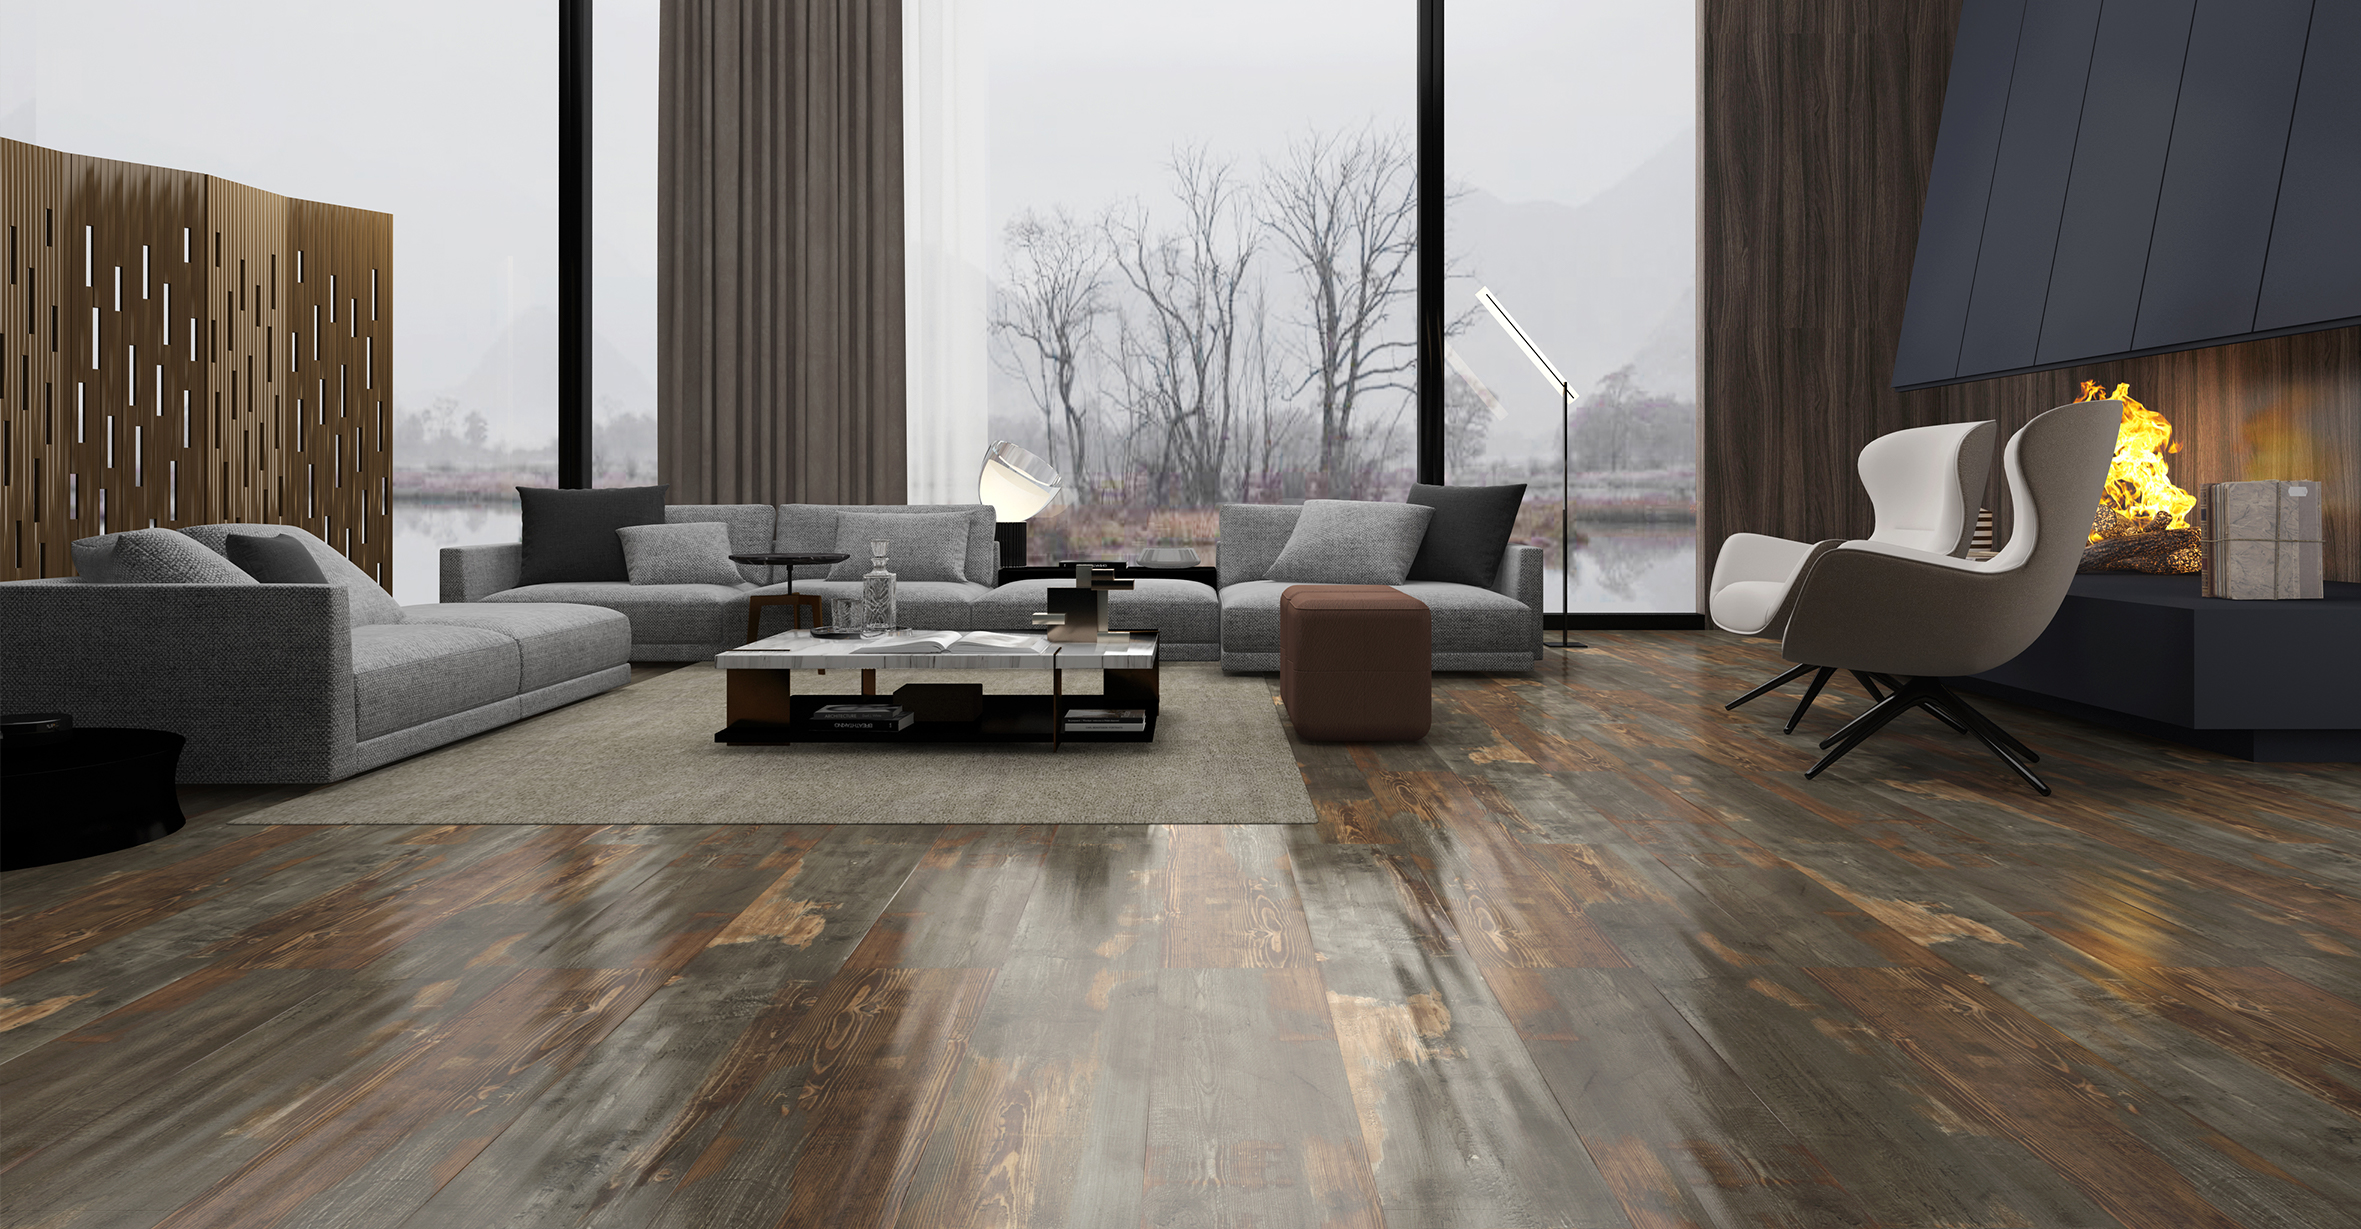 Baudiers Flooring - Luxury Vinyl Tile - Plank Sales and Installation  Company Gulfport: Commercial or Residential Hardwood Floors | Hardwood  Flooring Contractor | Gulfport, Diberville, Biloxi MS 39501